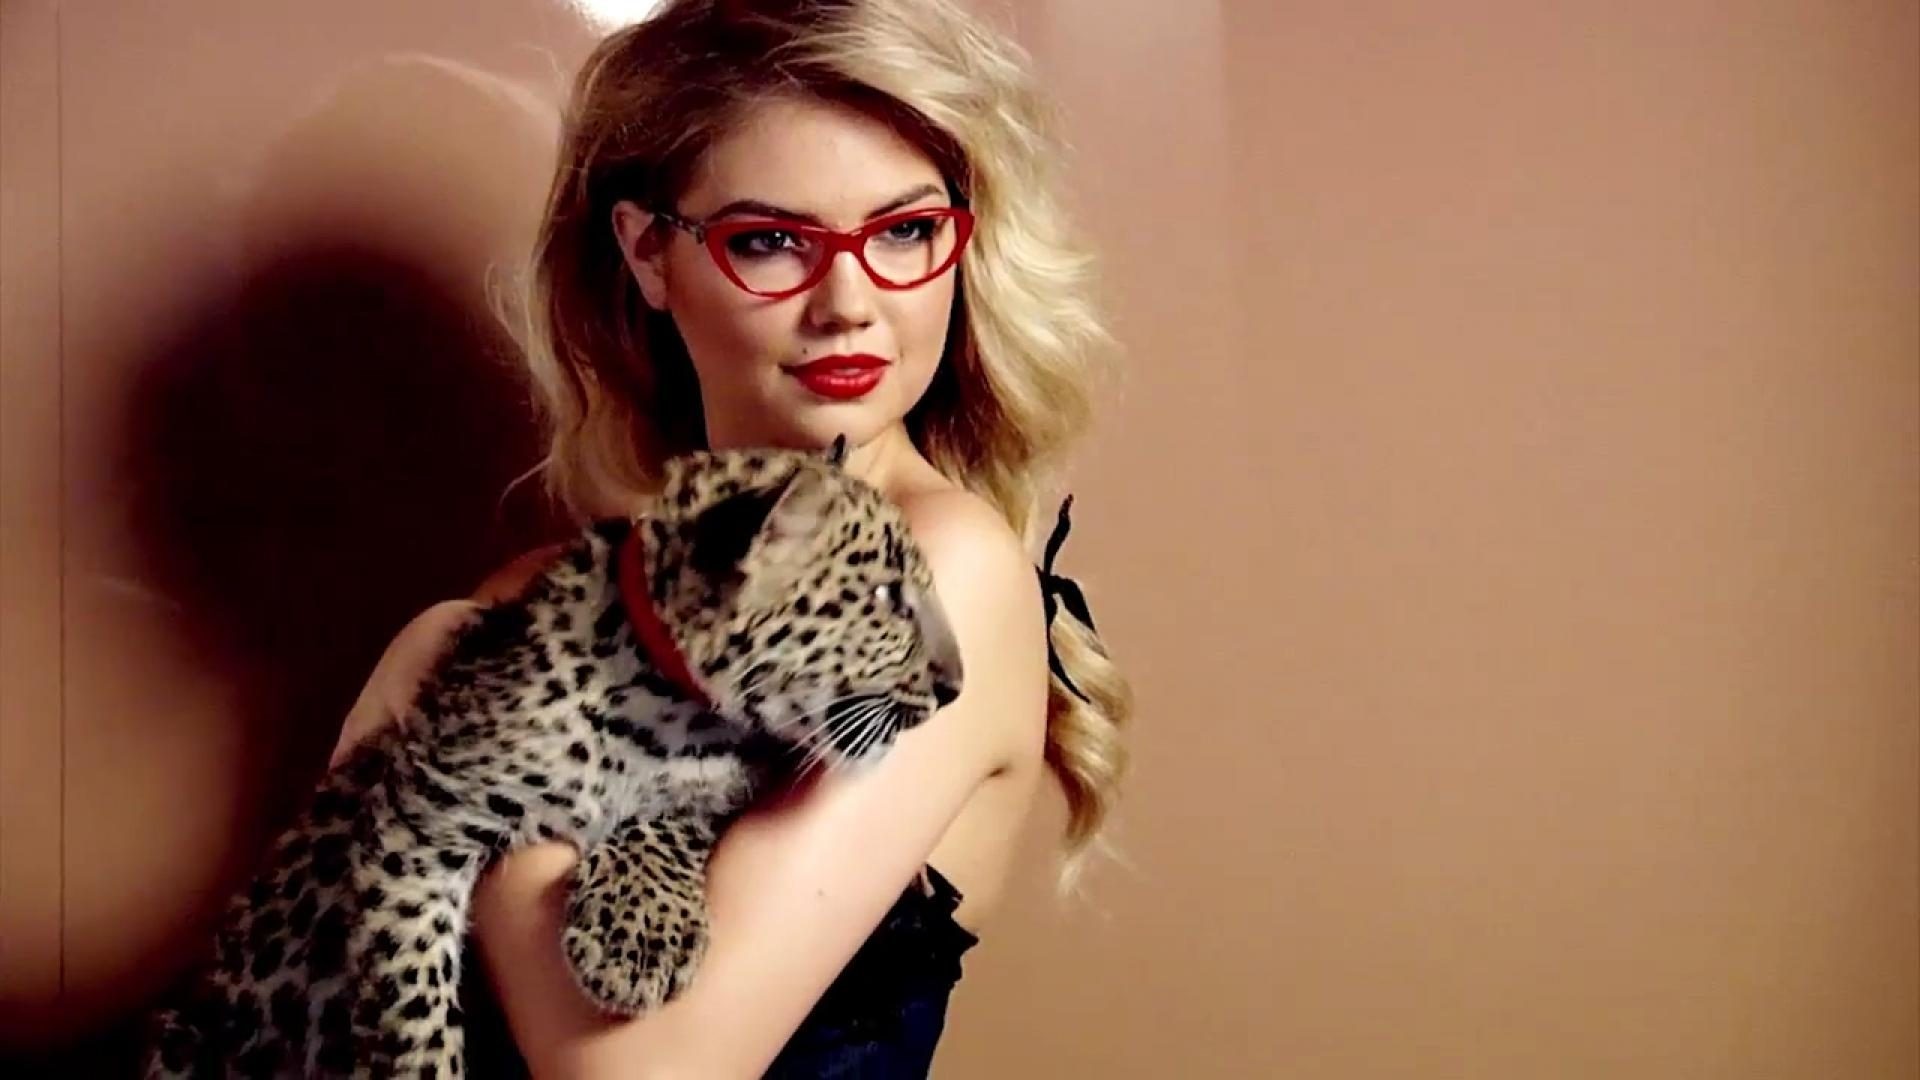 Image Kate Upton with Tiger Wallpaper